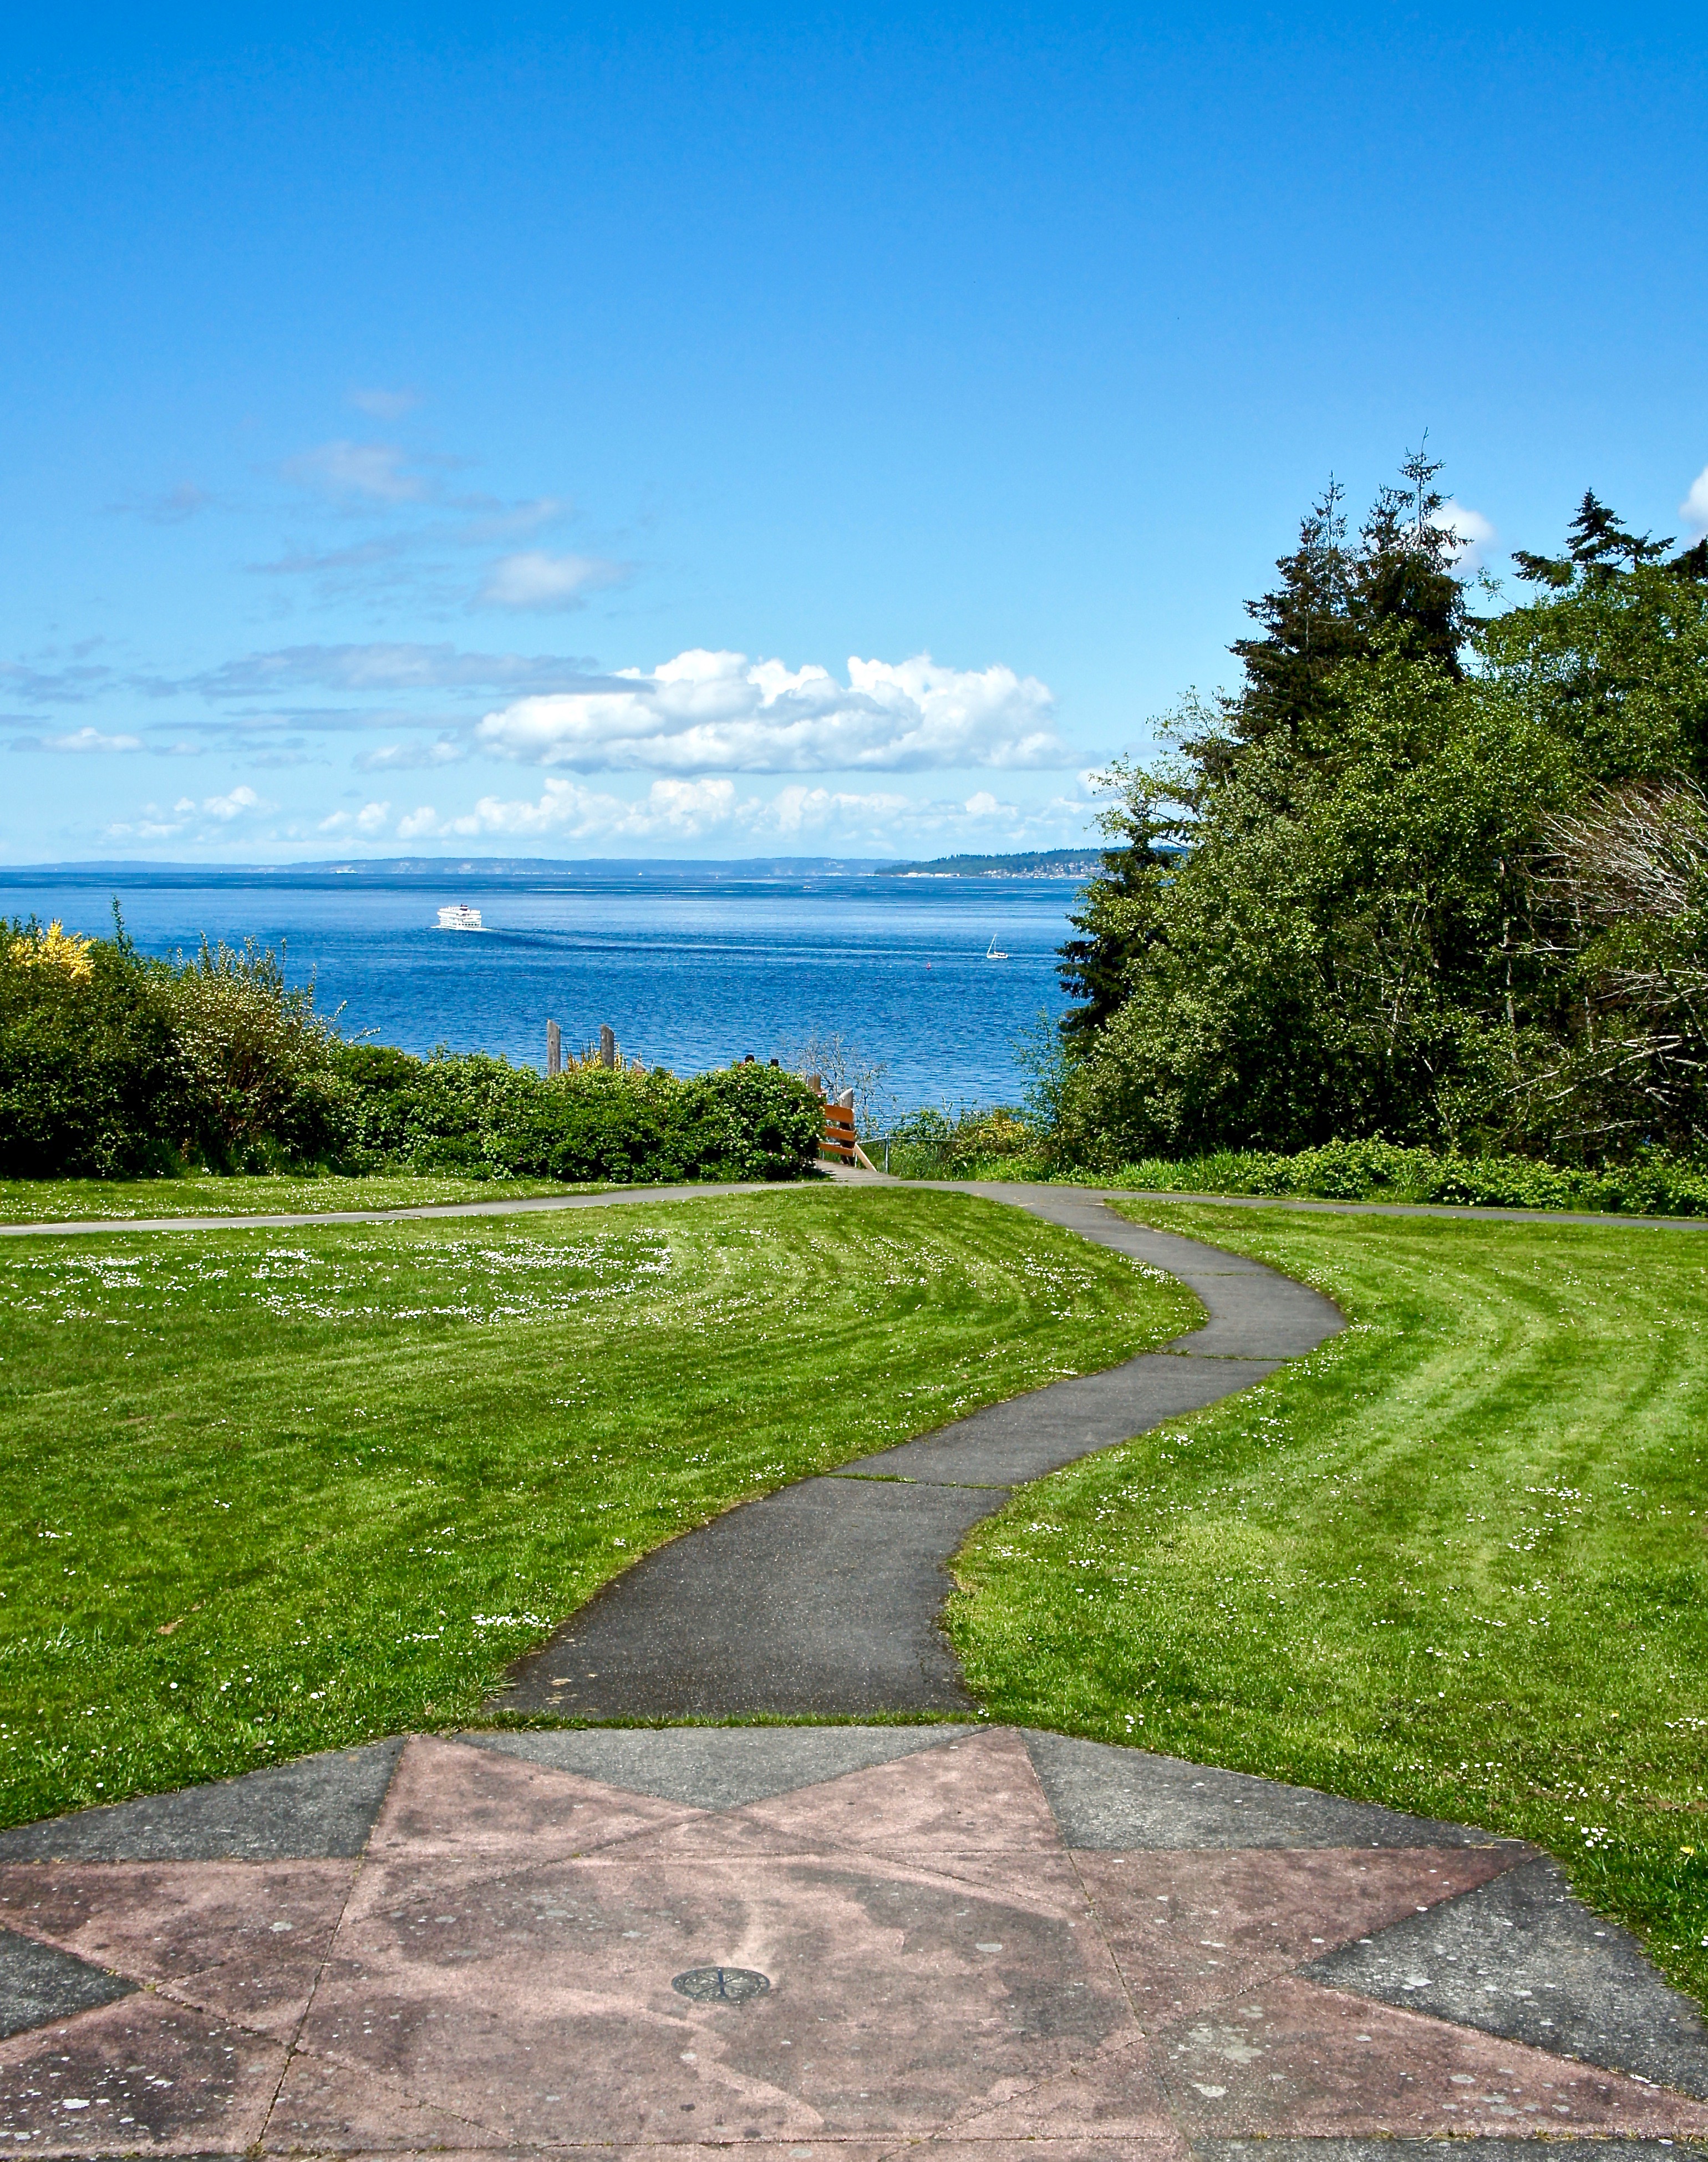 Seattle S Discovery Park Is Perfect For Exploring Year Round